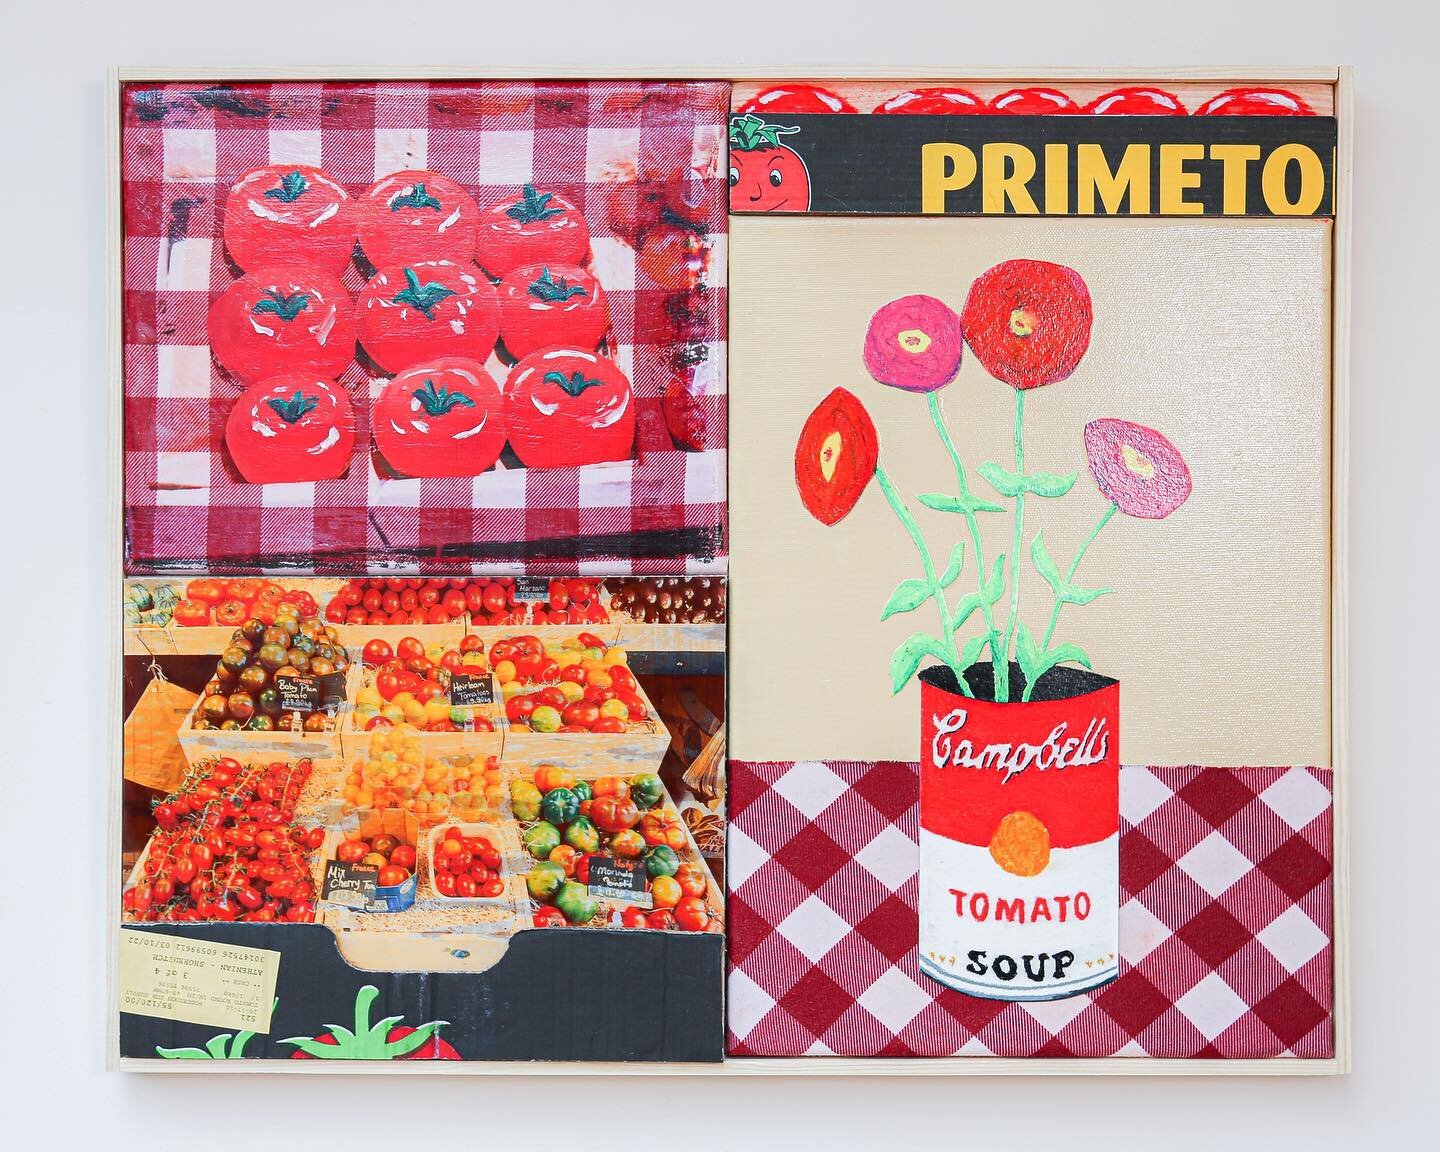 &ldquo;TOMATOES&rdquo;, acrylic, oil, spray paint, oil pastel, acetate, cardboard and paper on fabric, canvas and wood, framed in pine artist made frame, 52.5 x 42.5cm, 2023.

First pieces of work are beginning to emerge out of the studio from this y